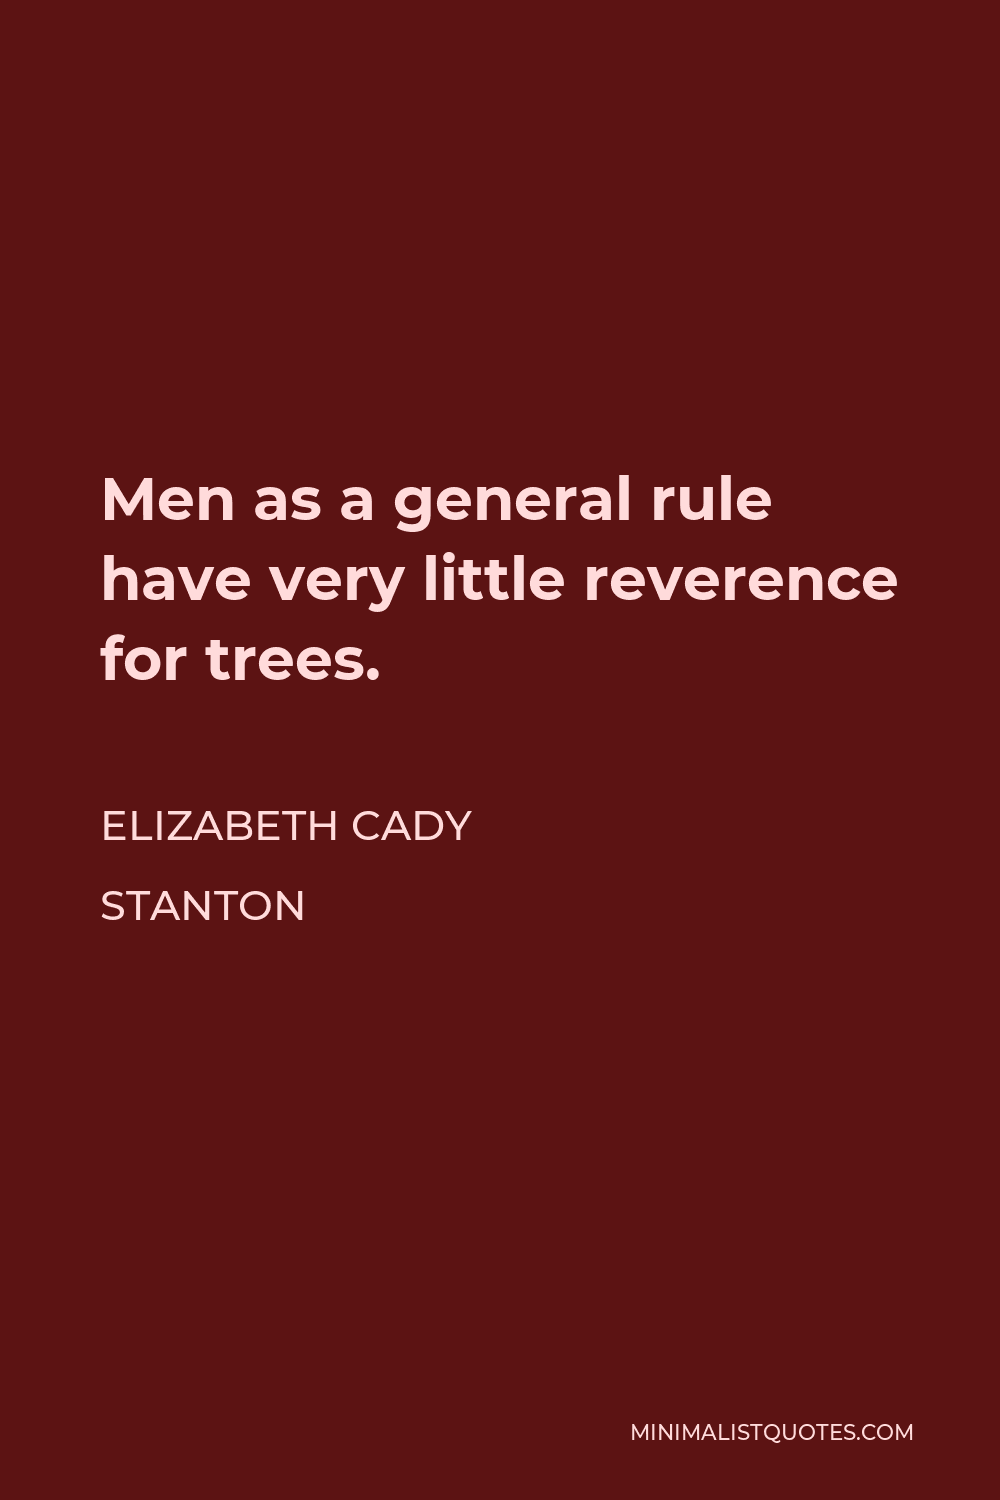 Elizabeth Cady Stanton Quote - Men as a general rule have very little reverence for trees.